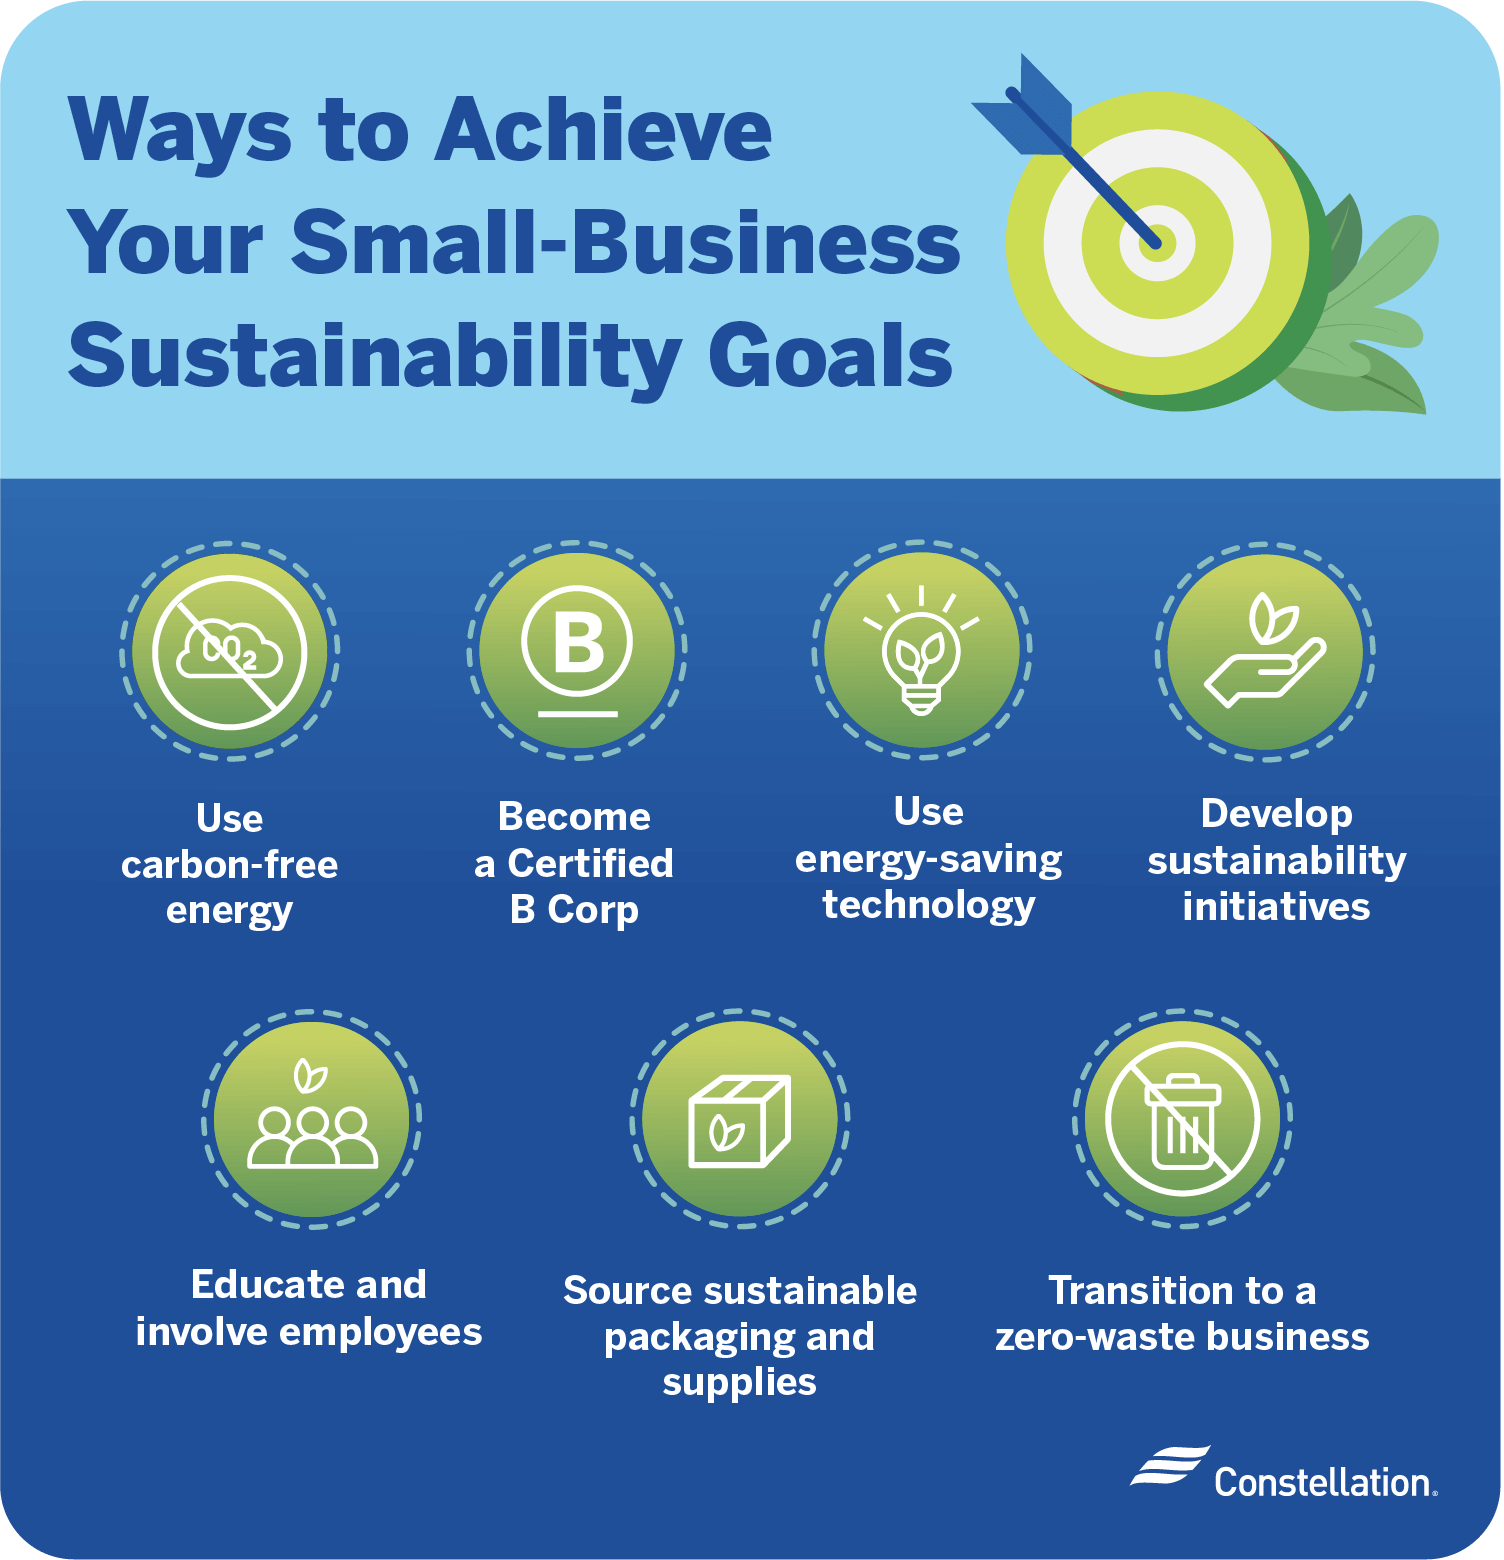 Ways to help achieve your small business sustainability goals.